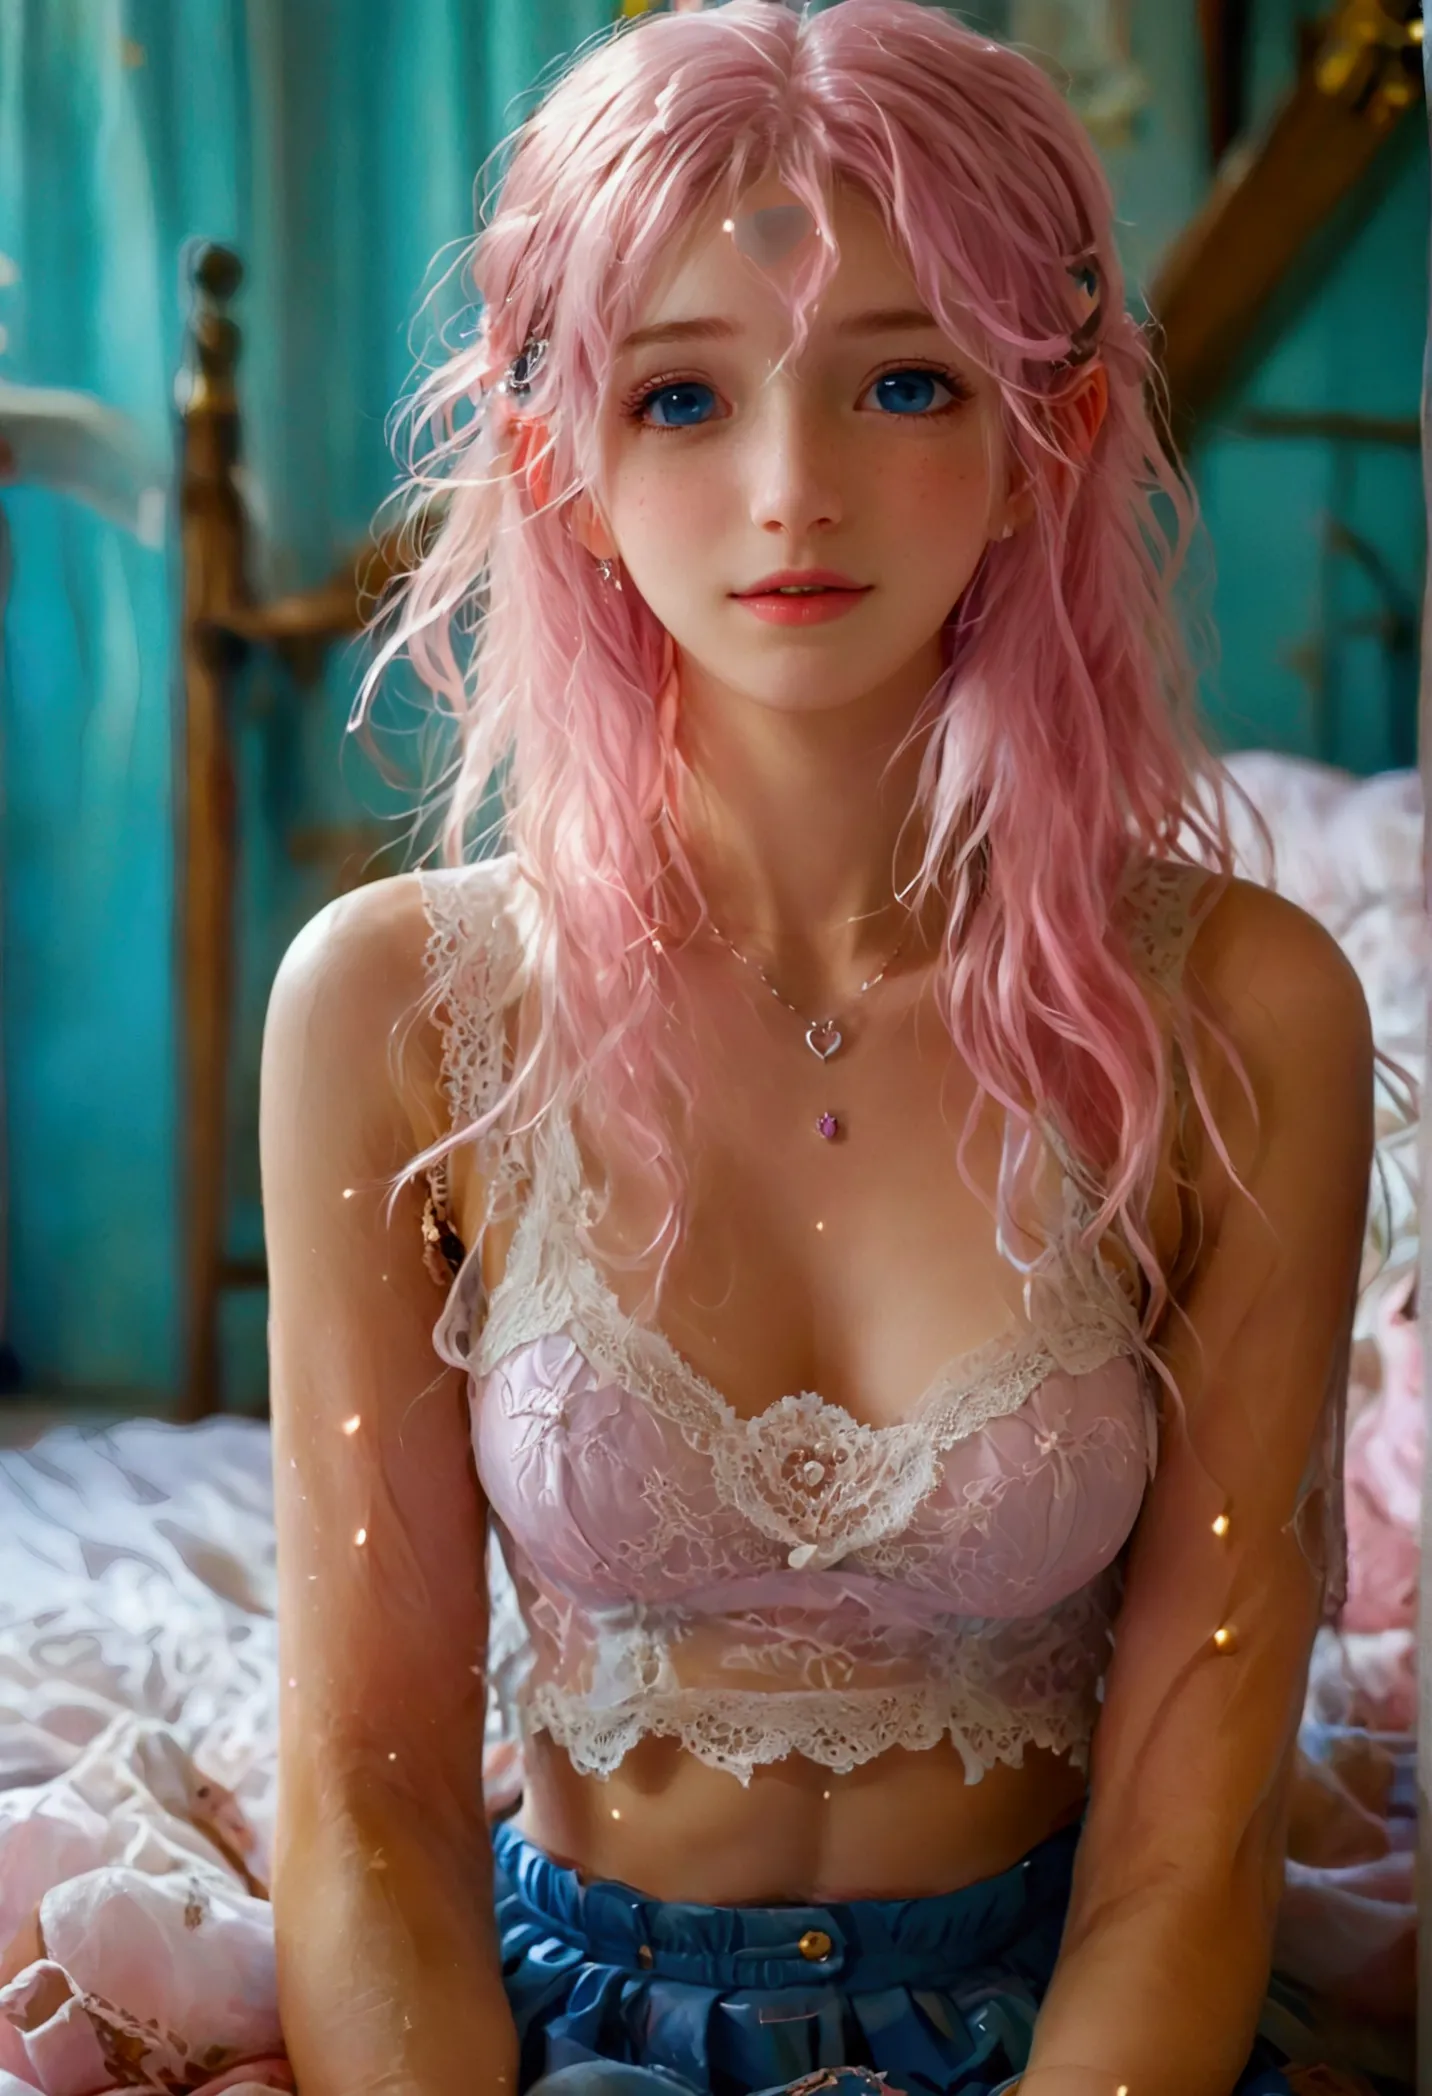 a girl, white skin, young, long pink hair, messy hair, thin arms, small mouth, small nose, small breasts, round face, pink skirt...